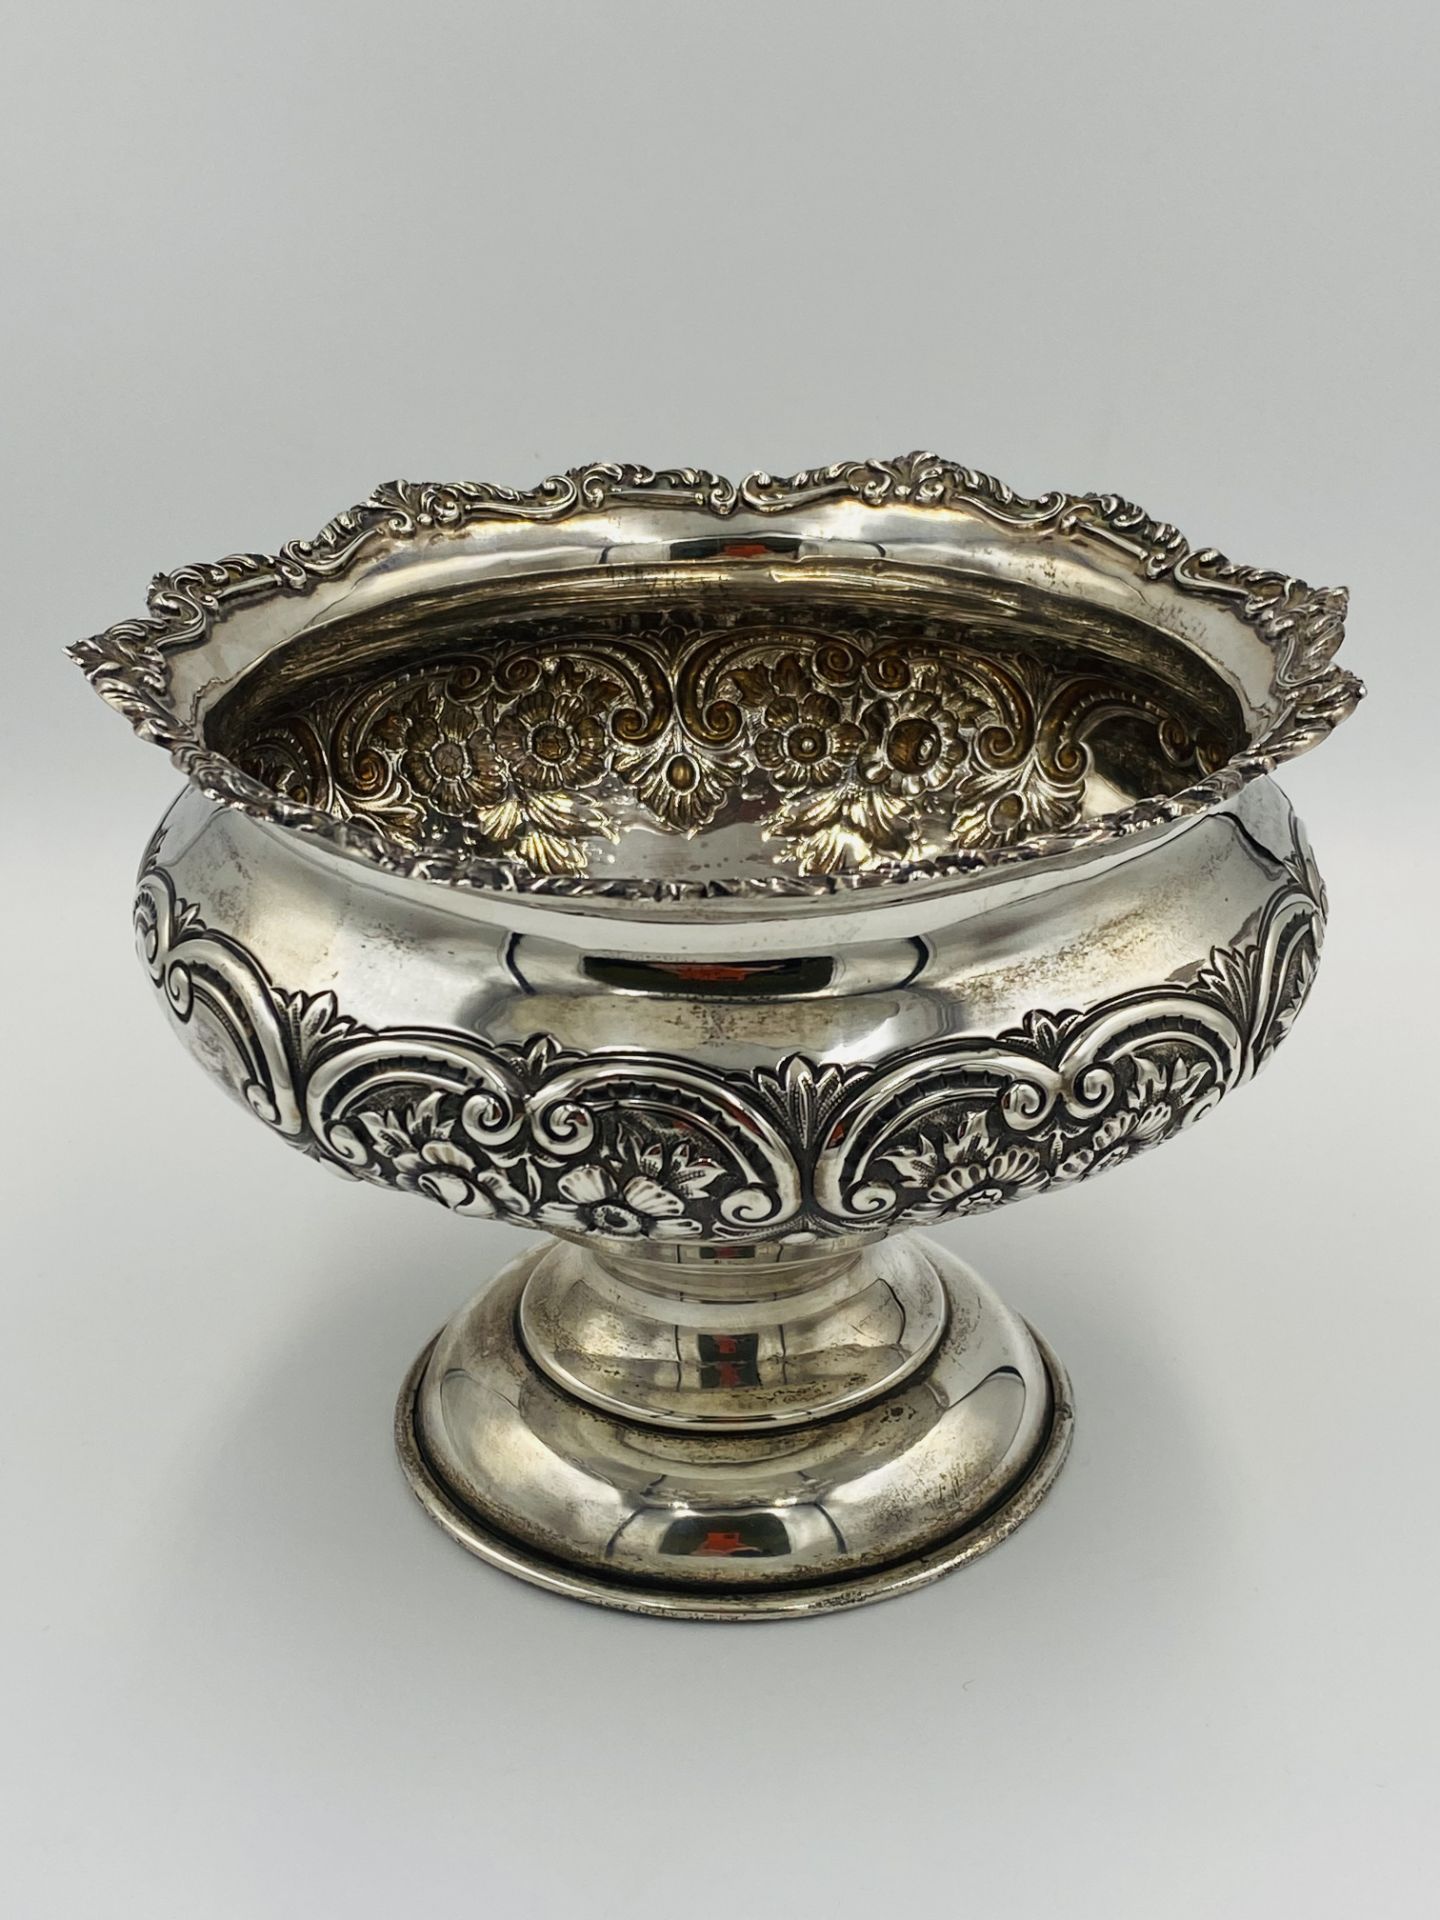 Silver bowl with repousse decoration - Image 3 of 9